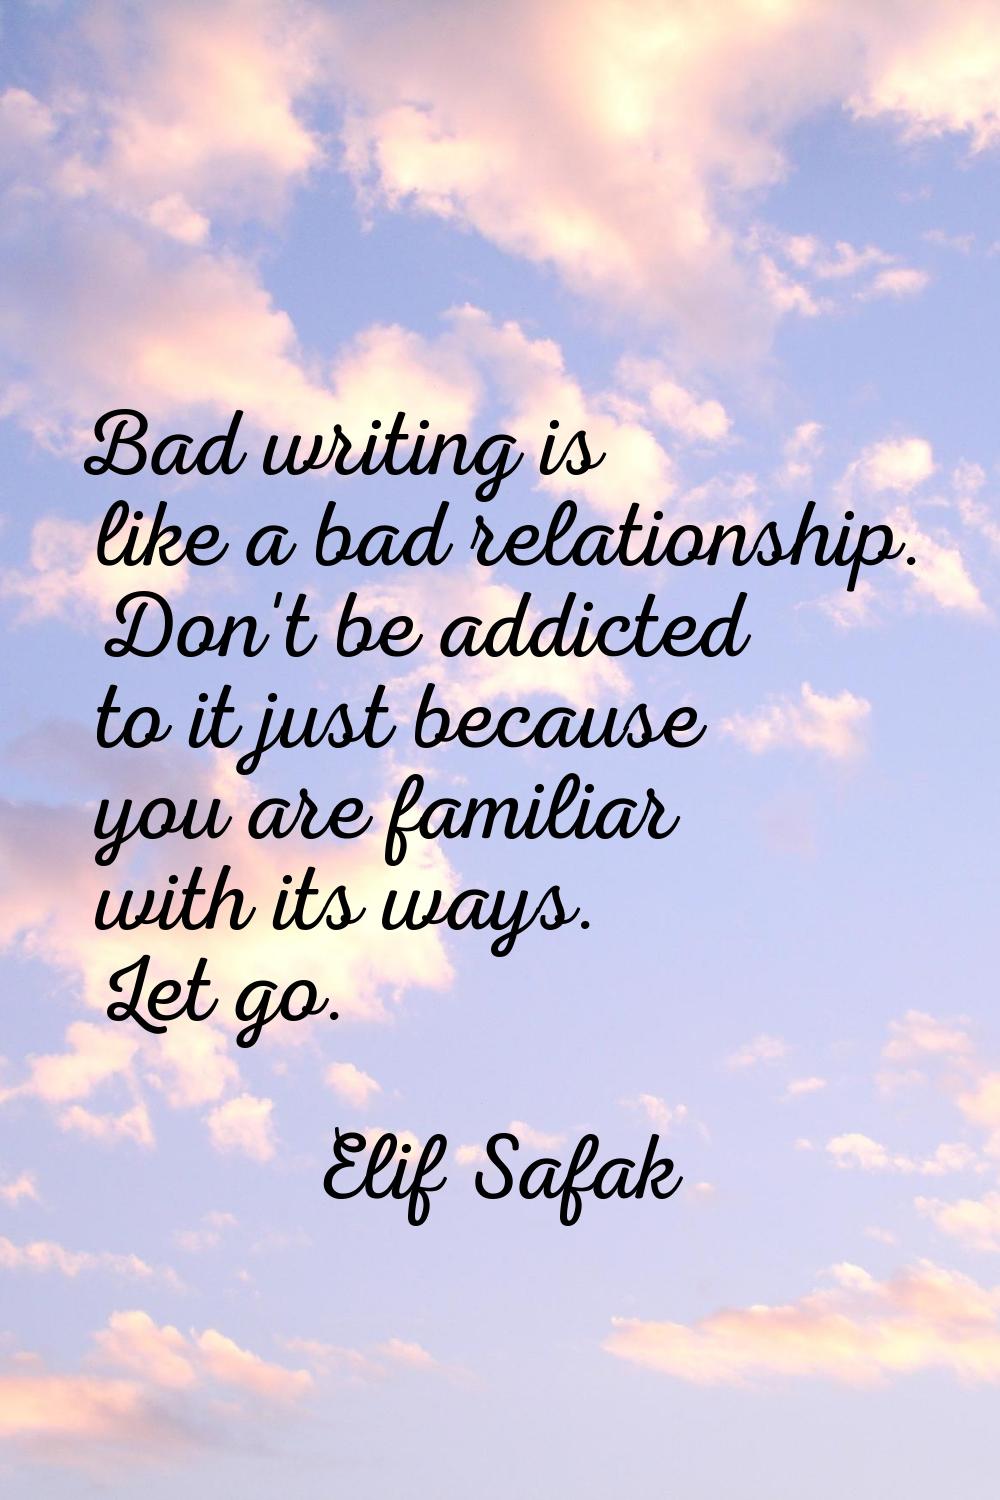 Bad writing is like a bad relationship. Don't be addicted to it just because you are familiar with 